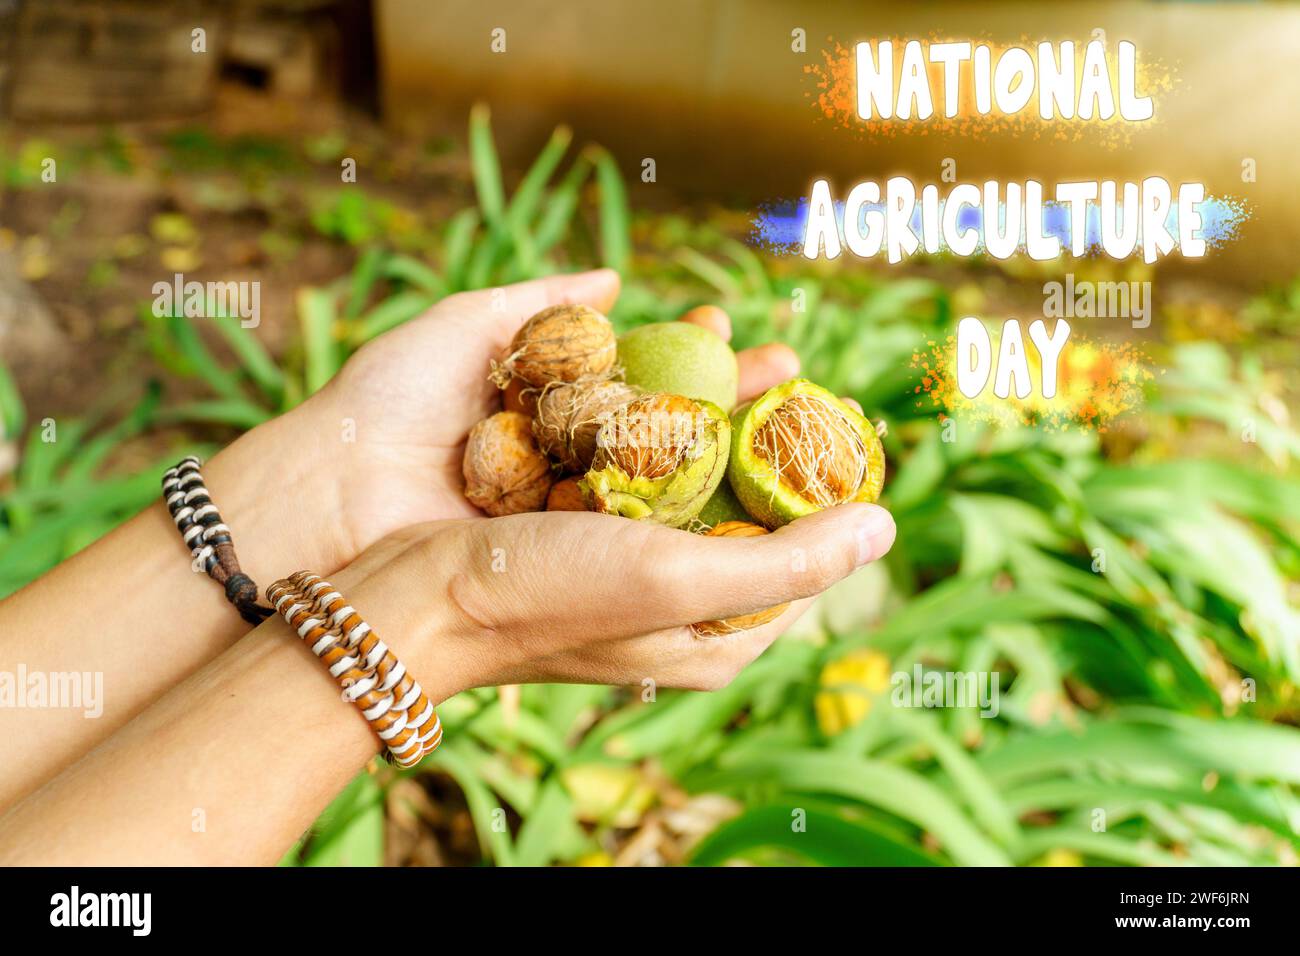 Celebrating National Agriculture Day With the Bounty of Natures Harvest Stock Photo